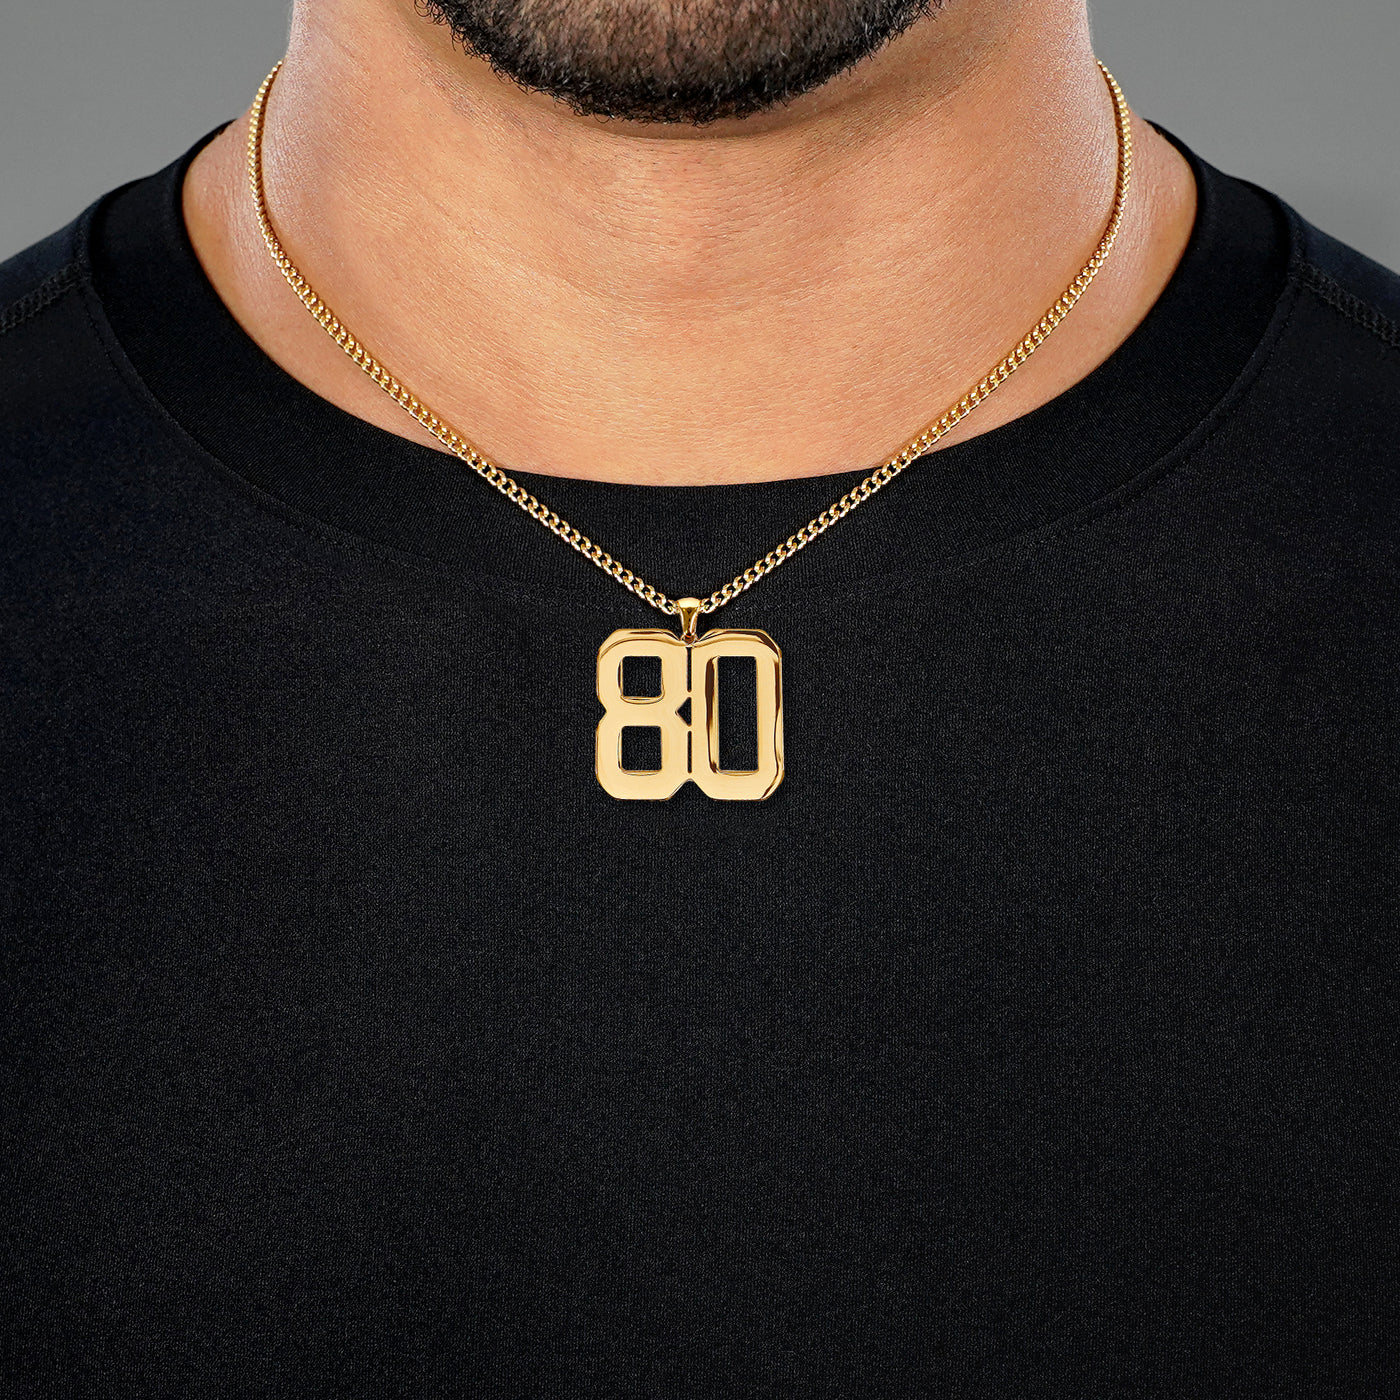 80 Number Pendant with Chain Necklace - Gold Plated Stainless Steel